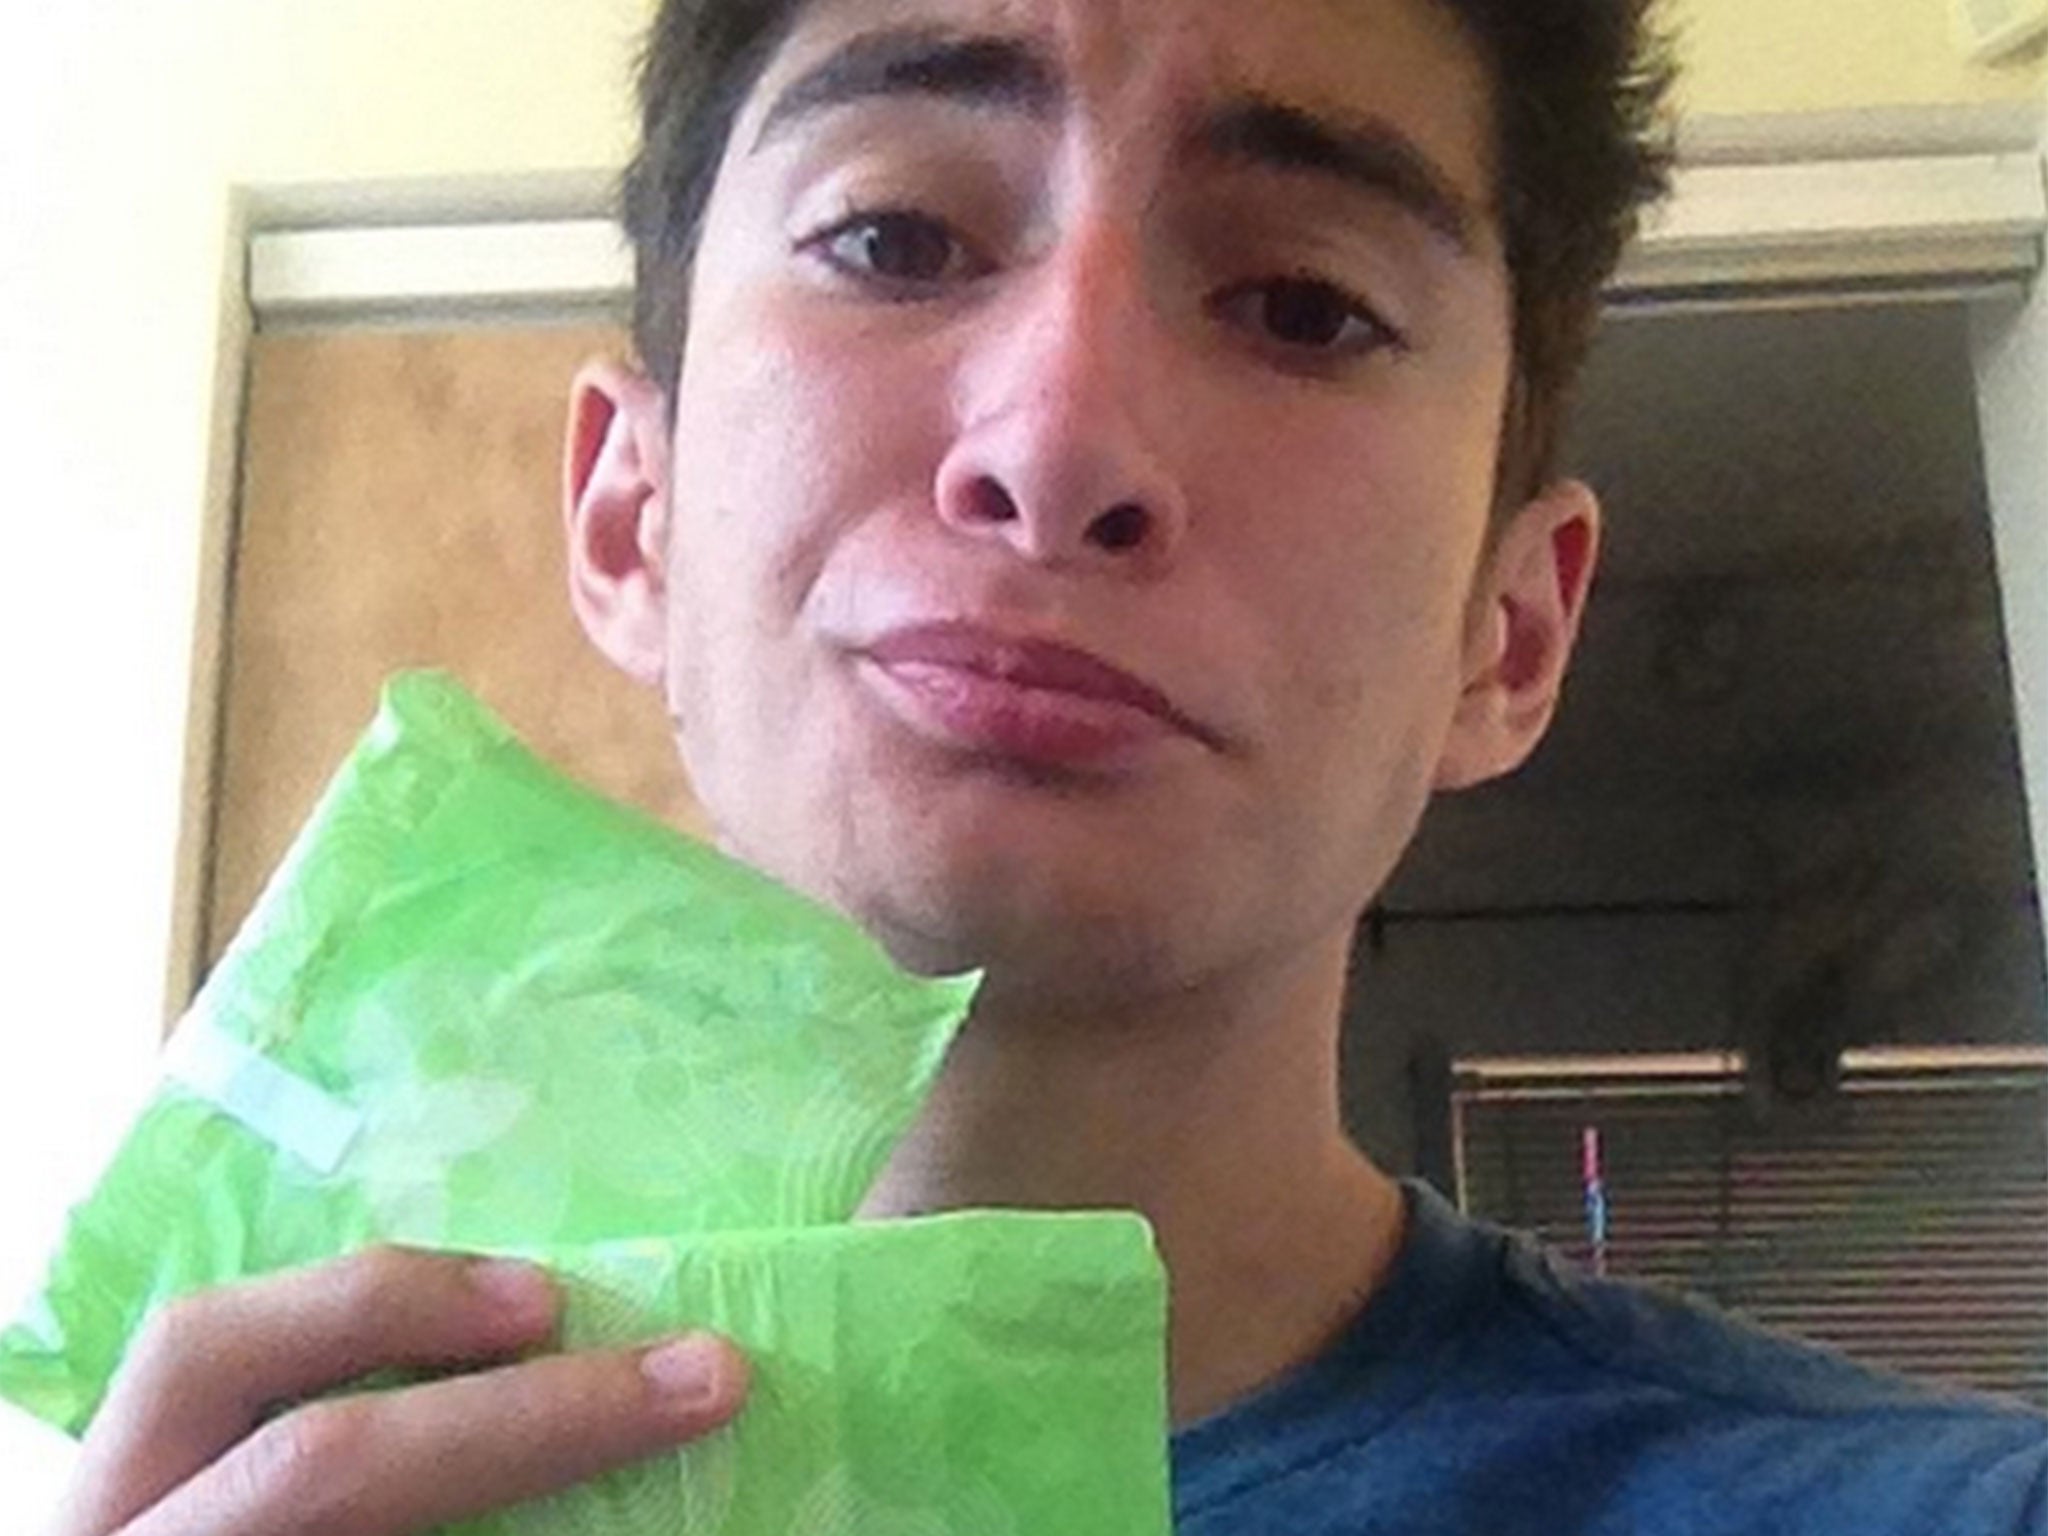 Jose Garcia, who has been praised for pledging to carry sanitary towels in case his friends are in need